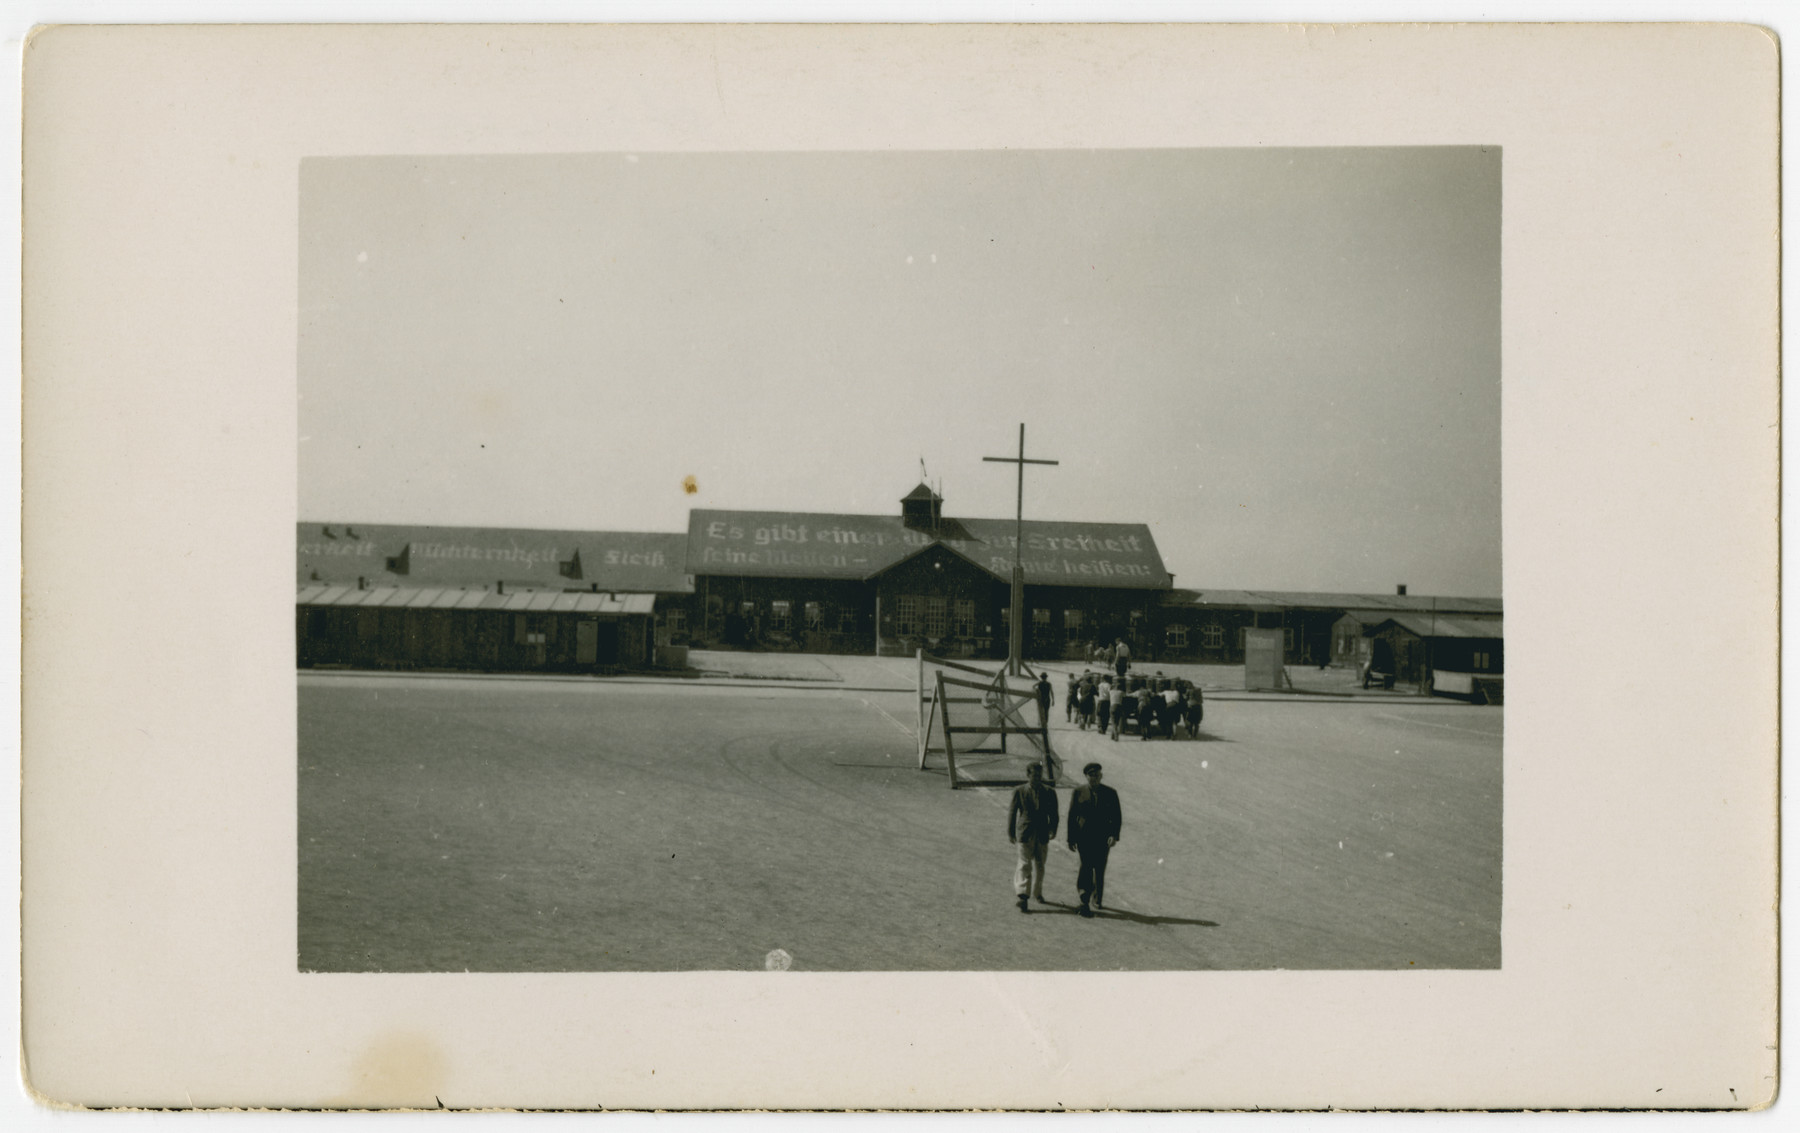 Two survivors walk through the central courtyard of the Dachau concentration camp while a larger group pushes a wagon in the background.

The original caption reads: "Cart for hauling dead prisoners."